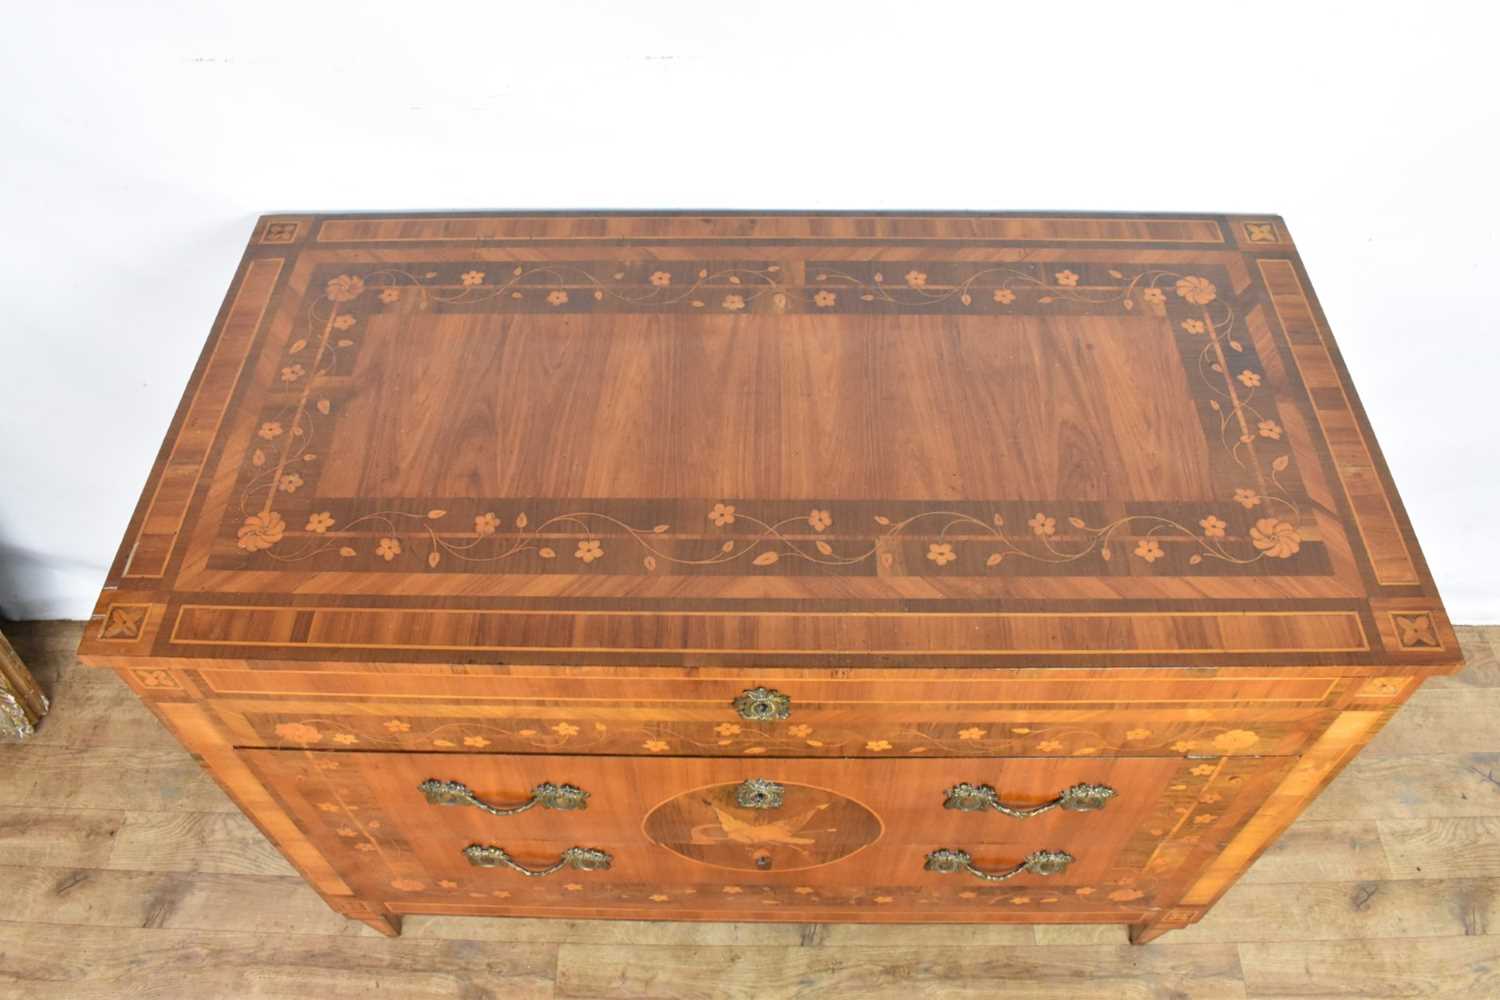 Late 18th century north Italian kingwood and marquetry inlaid commode - Image 6 of 21